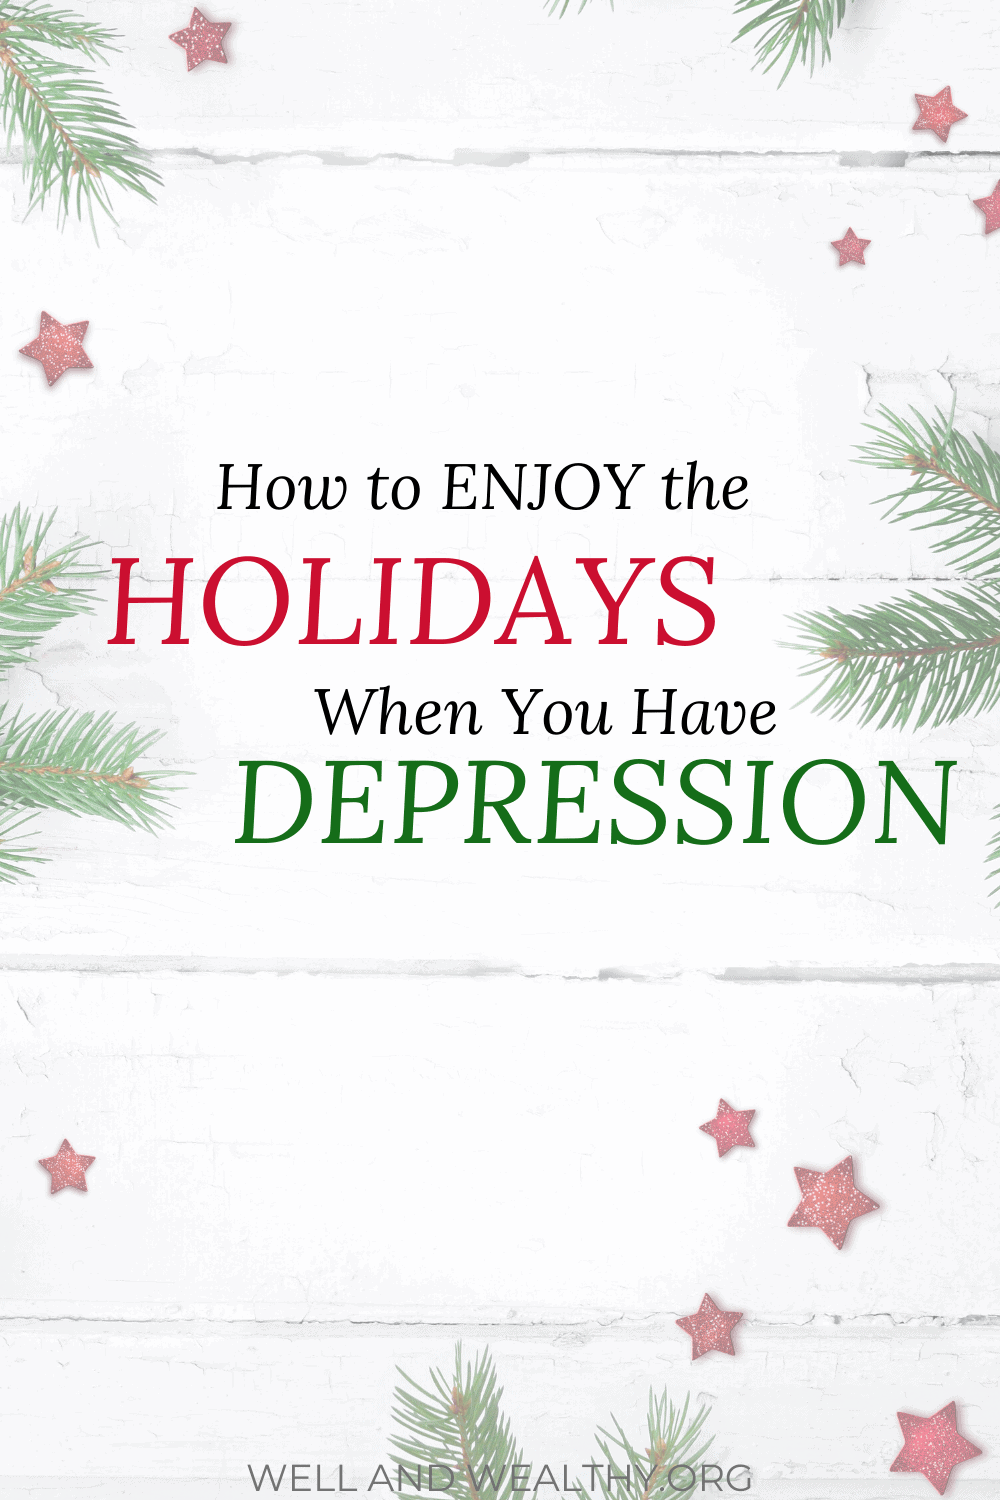 Feeling anxious about the Holidays? Worried about your mental health and depression during Christmas? But you still want to enjoy the Holidays and have a magical Christmas? Then this post is for you! It explains how to cope with depression during the holidays, Christmas sel-fcare, how to cope with Christmas, Christmas stress relief and so much more. If you want to do more than just survive this holiday period then check out these 9 tips!